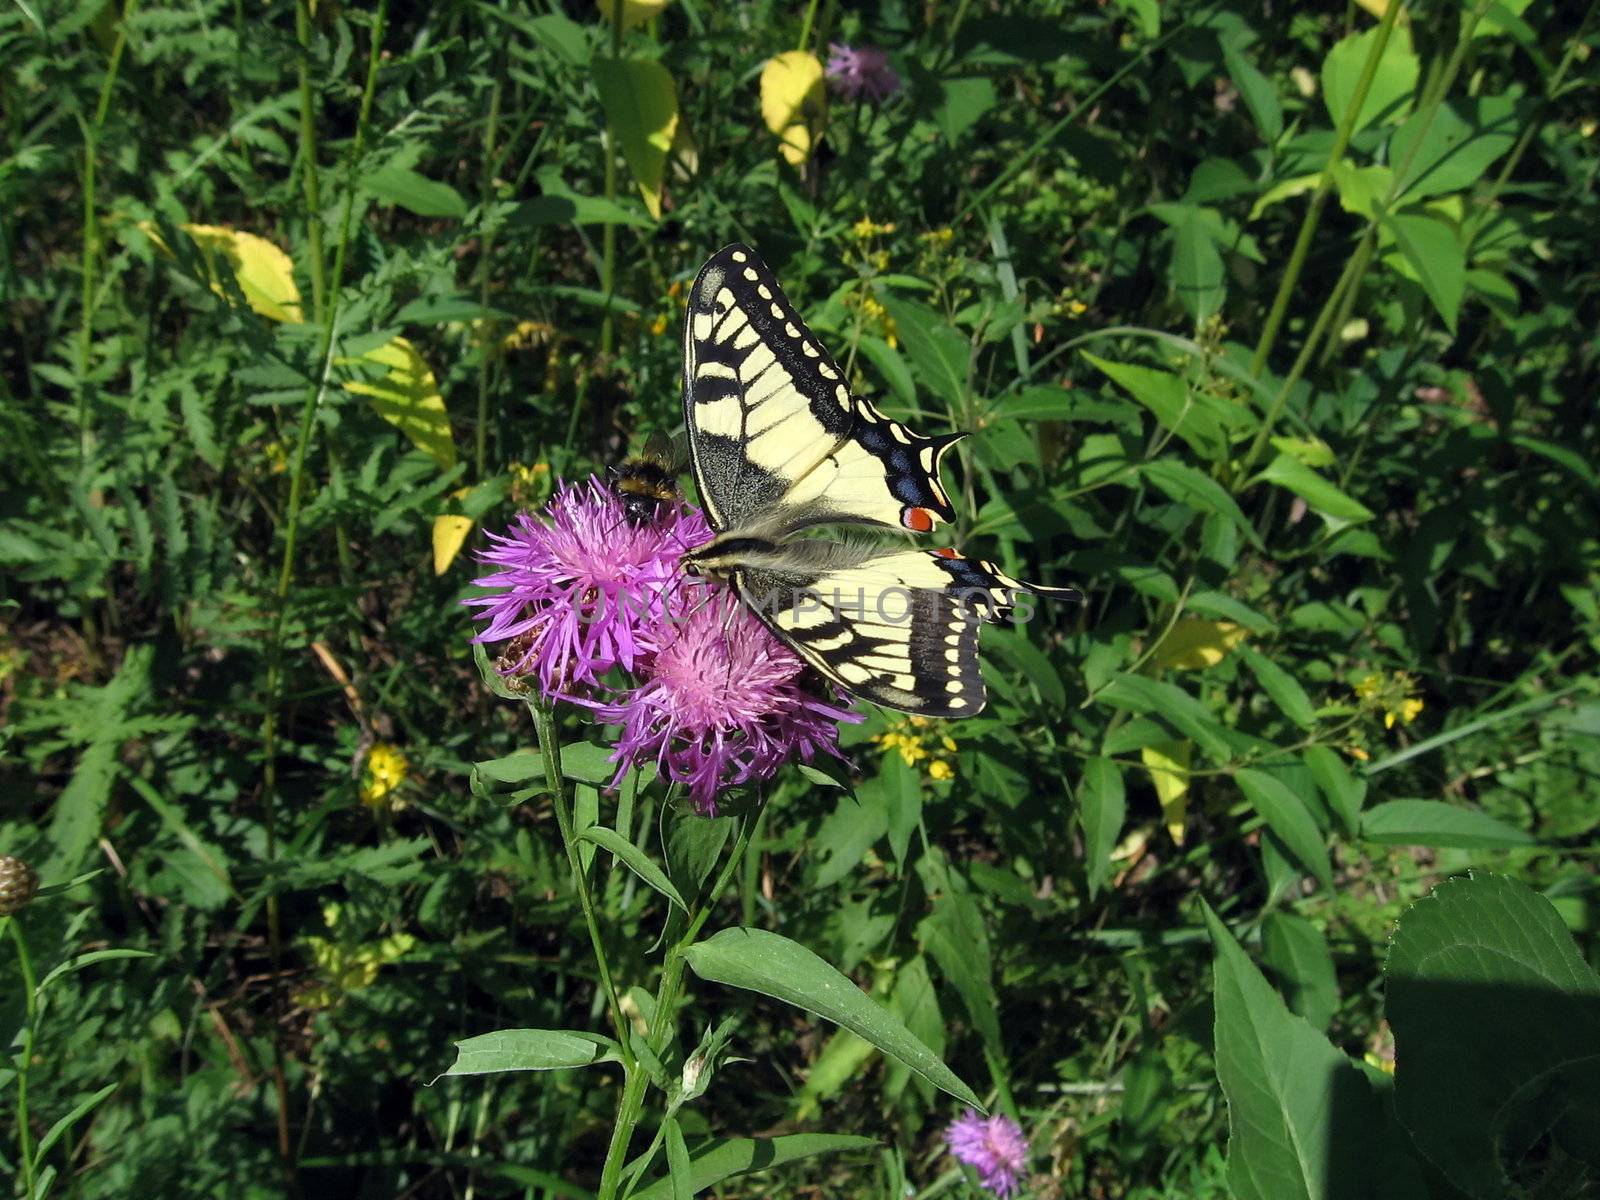 Swallowtail on the flower by tomatto